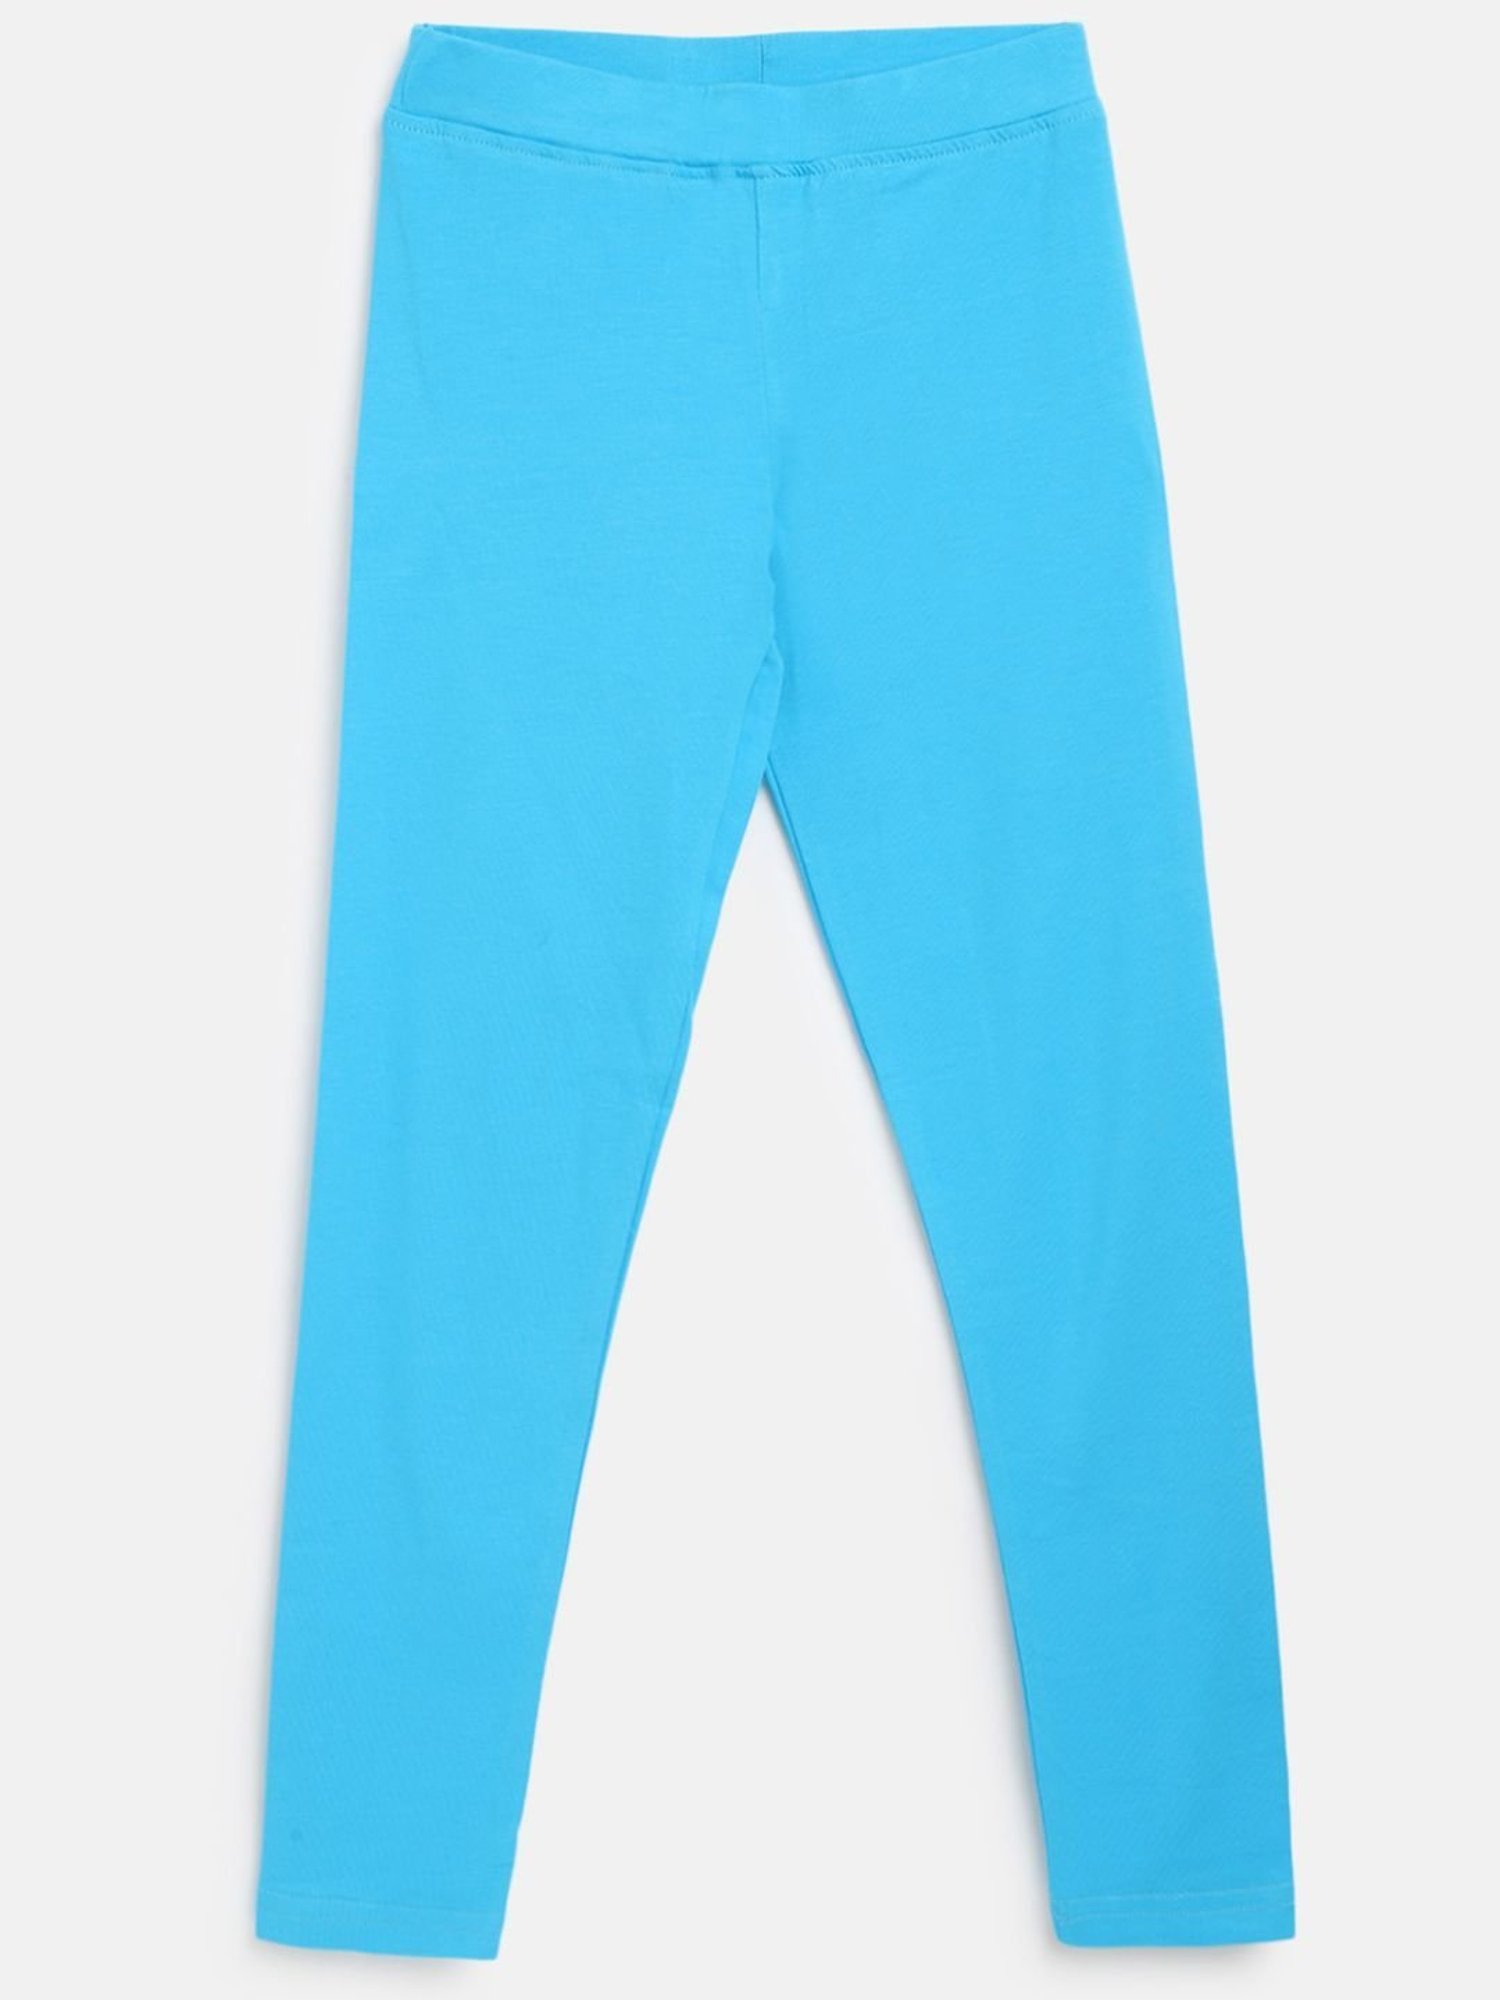 Buy Pine Kids Cotton Lycra Knit Full Length Solid Color Legging Blue Depth  for Girls (12-14Years) Online in India, Shop at FirstCry.com - 14166392